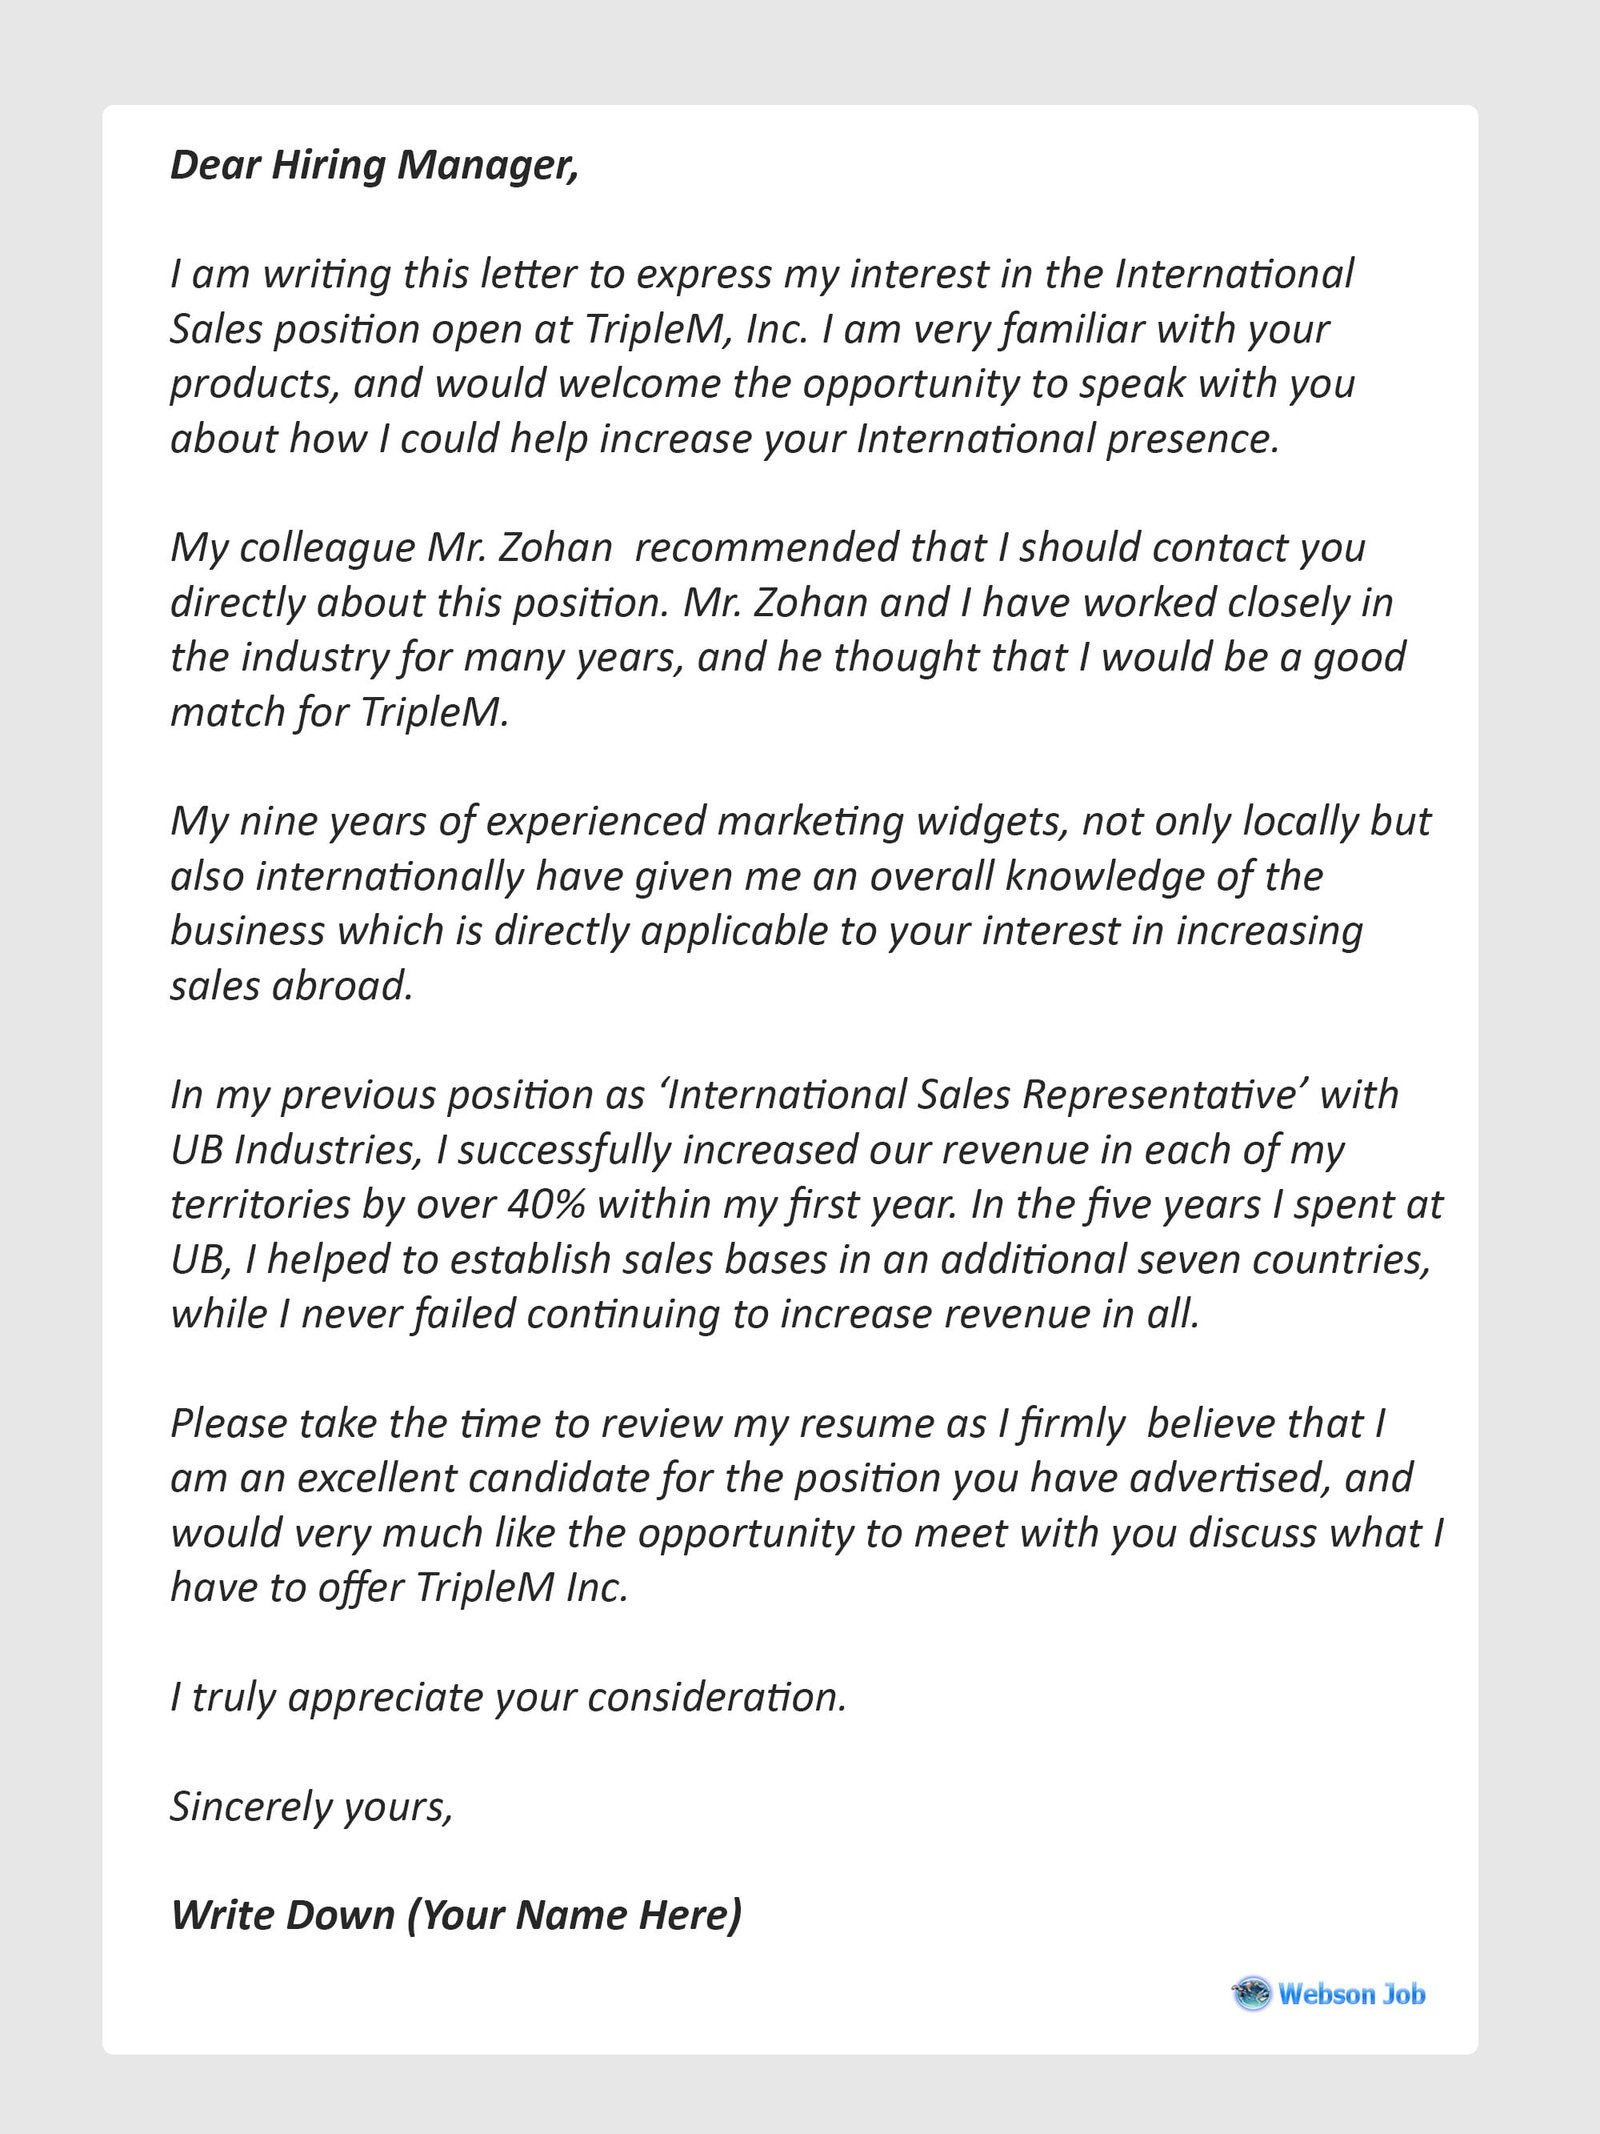 Sample Cover Letter For Marketing Job from www.websonjob.com